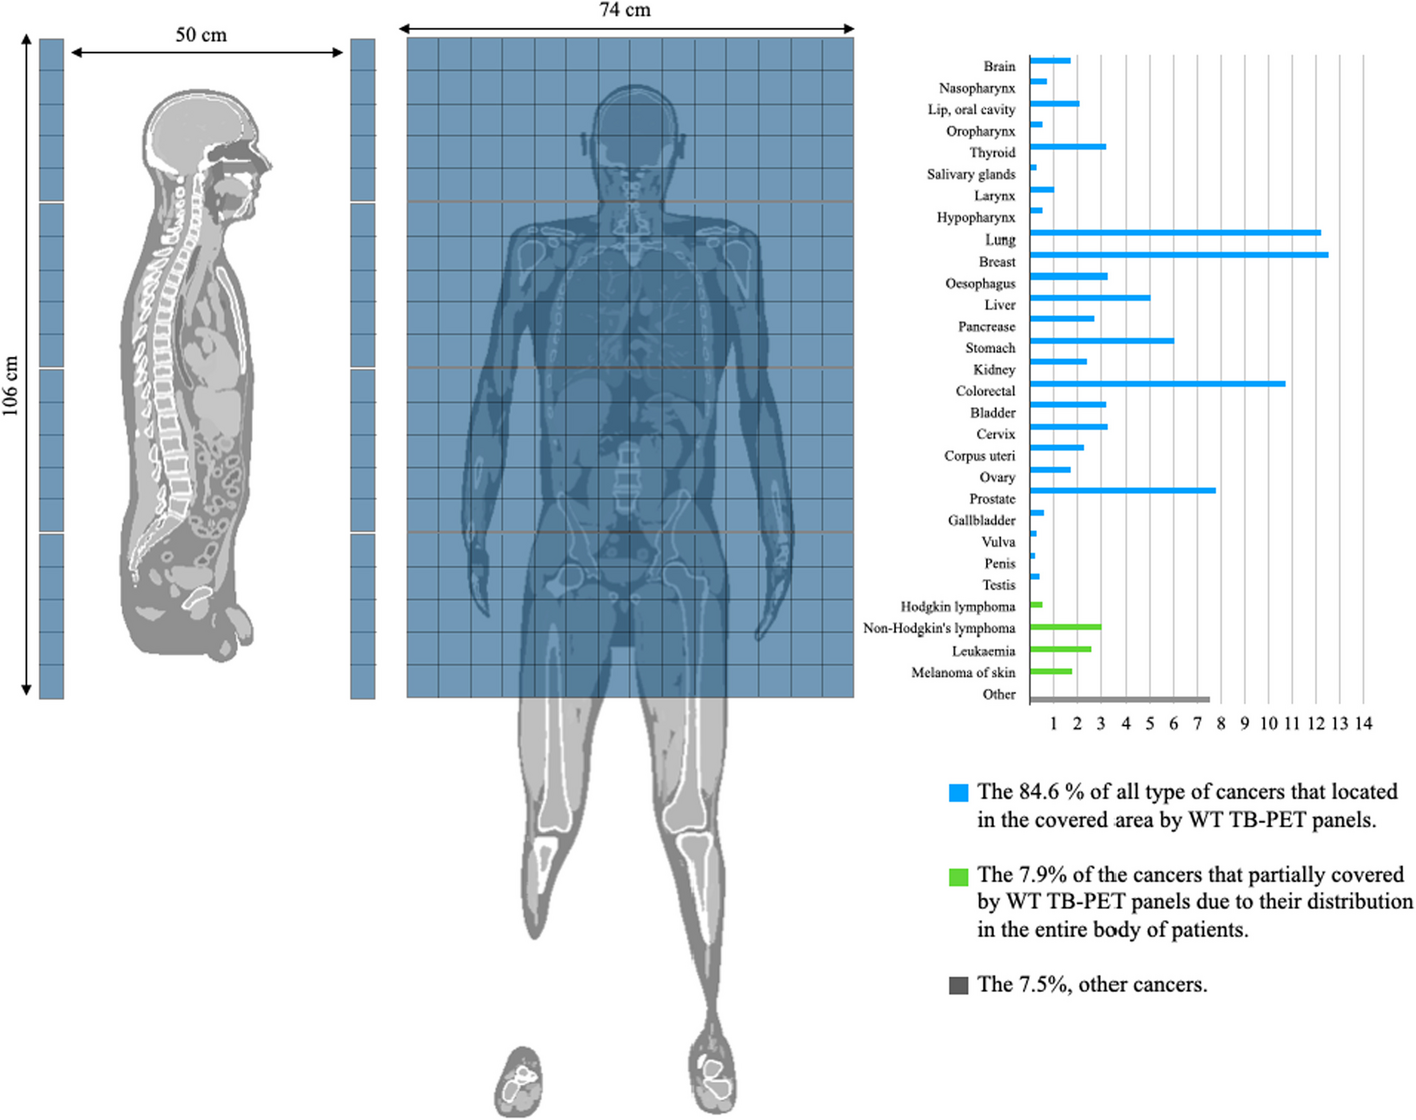 Evaluation of lesion contrast in the walk-through long axial FOV PET scanner simulated with XCAT anthropomorphic phantoms